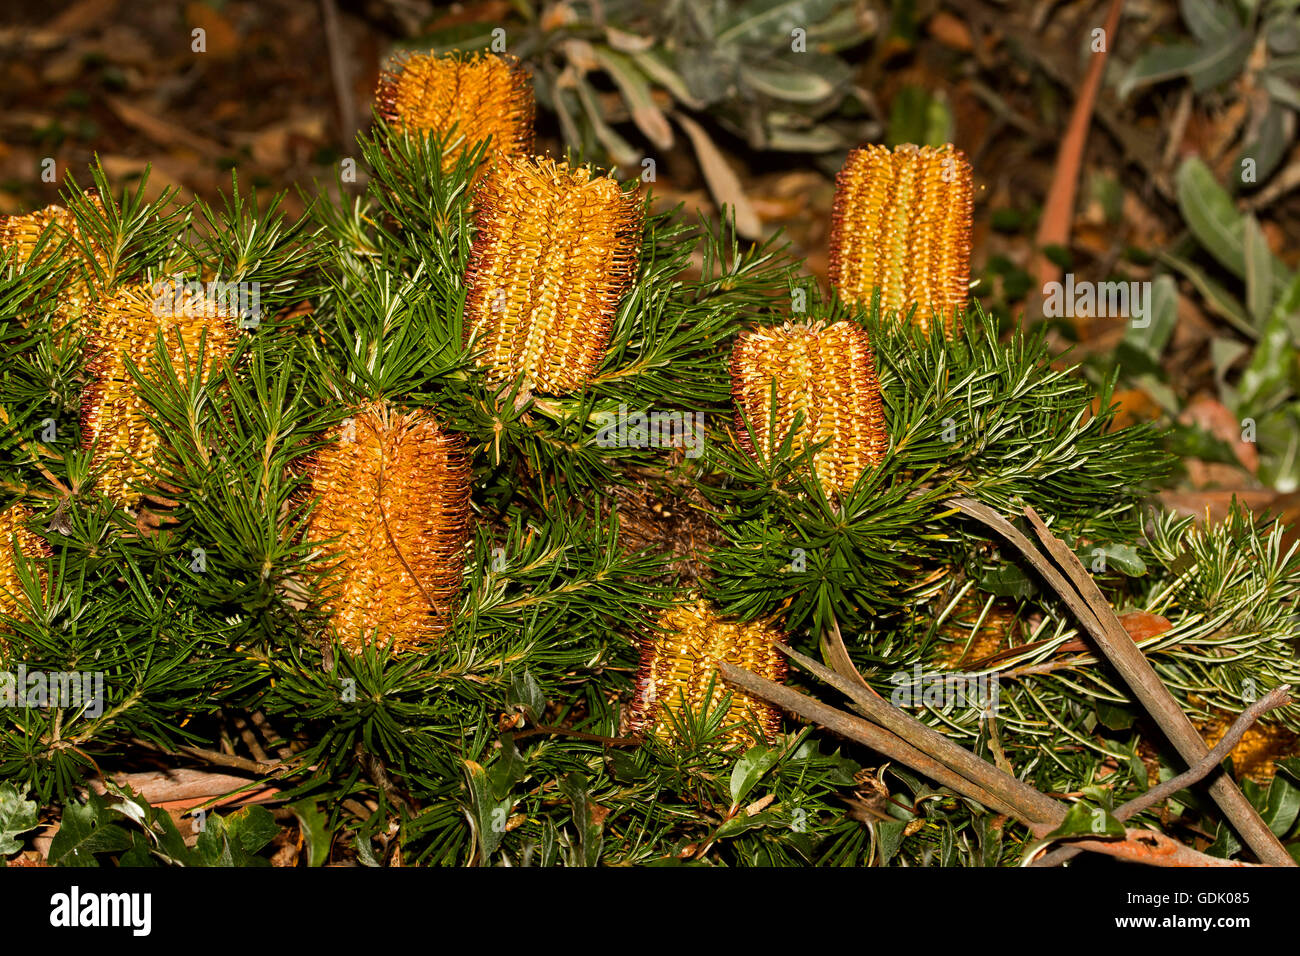 Panoramic image of cluster of spectacular vivid orange flowers and dark green leaves of Australian native plant Banksia spinulosa 'Bush Candles' Stock Photo